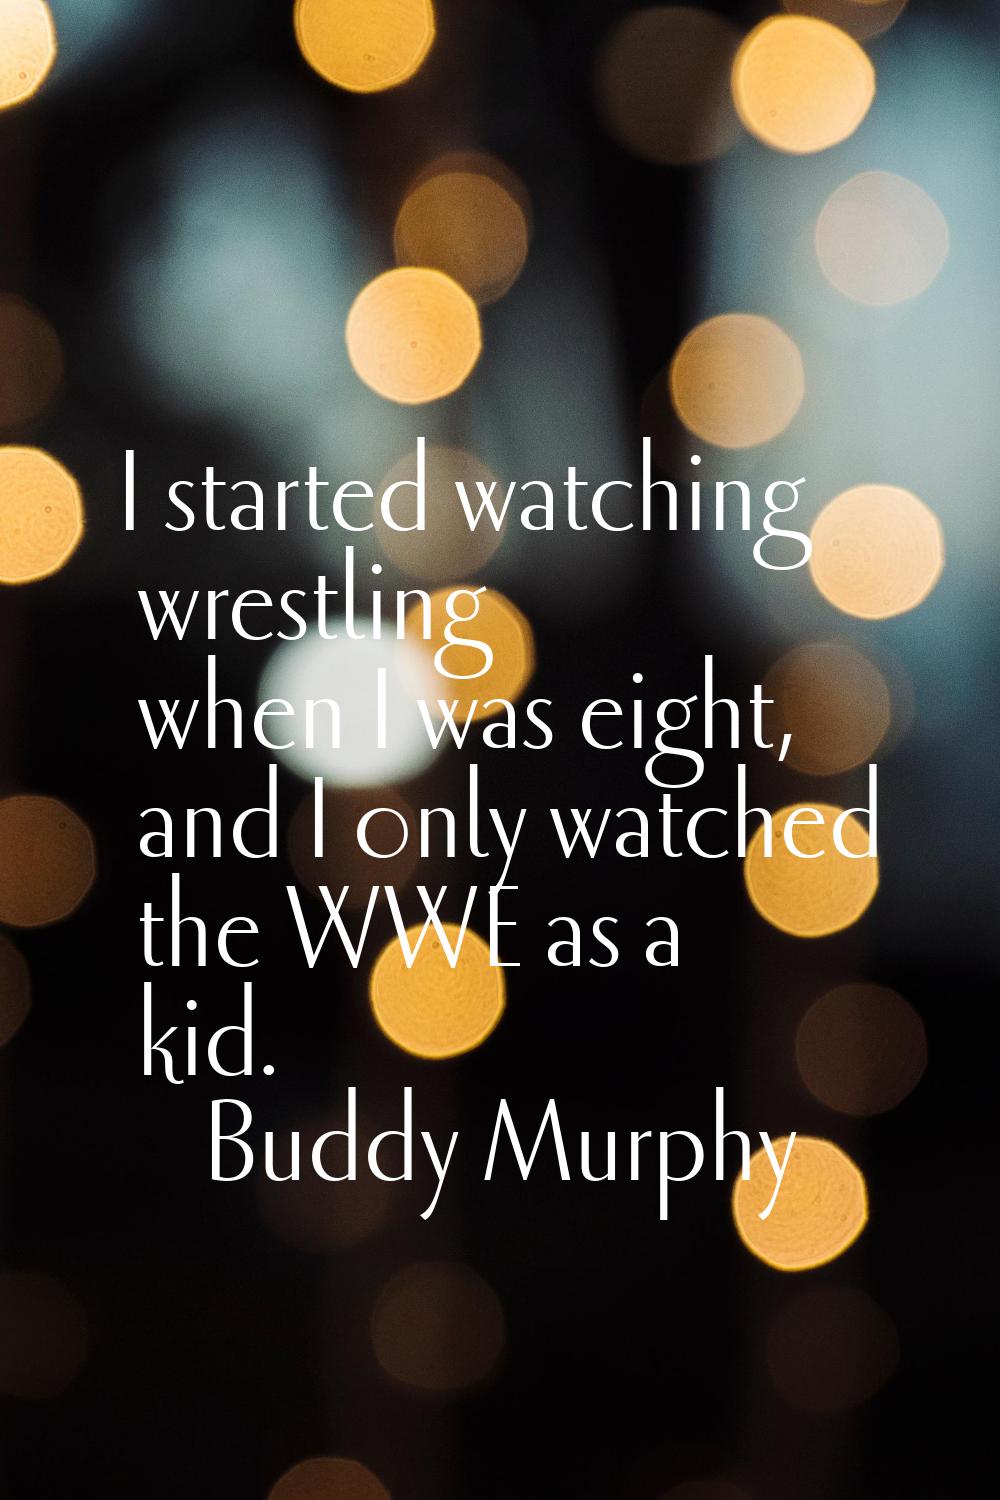 I started watching wrestling when I was eight, and I only watched the WWE as a kid.